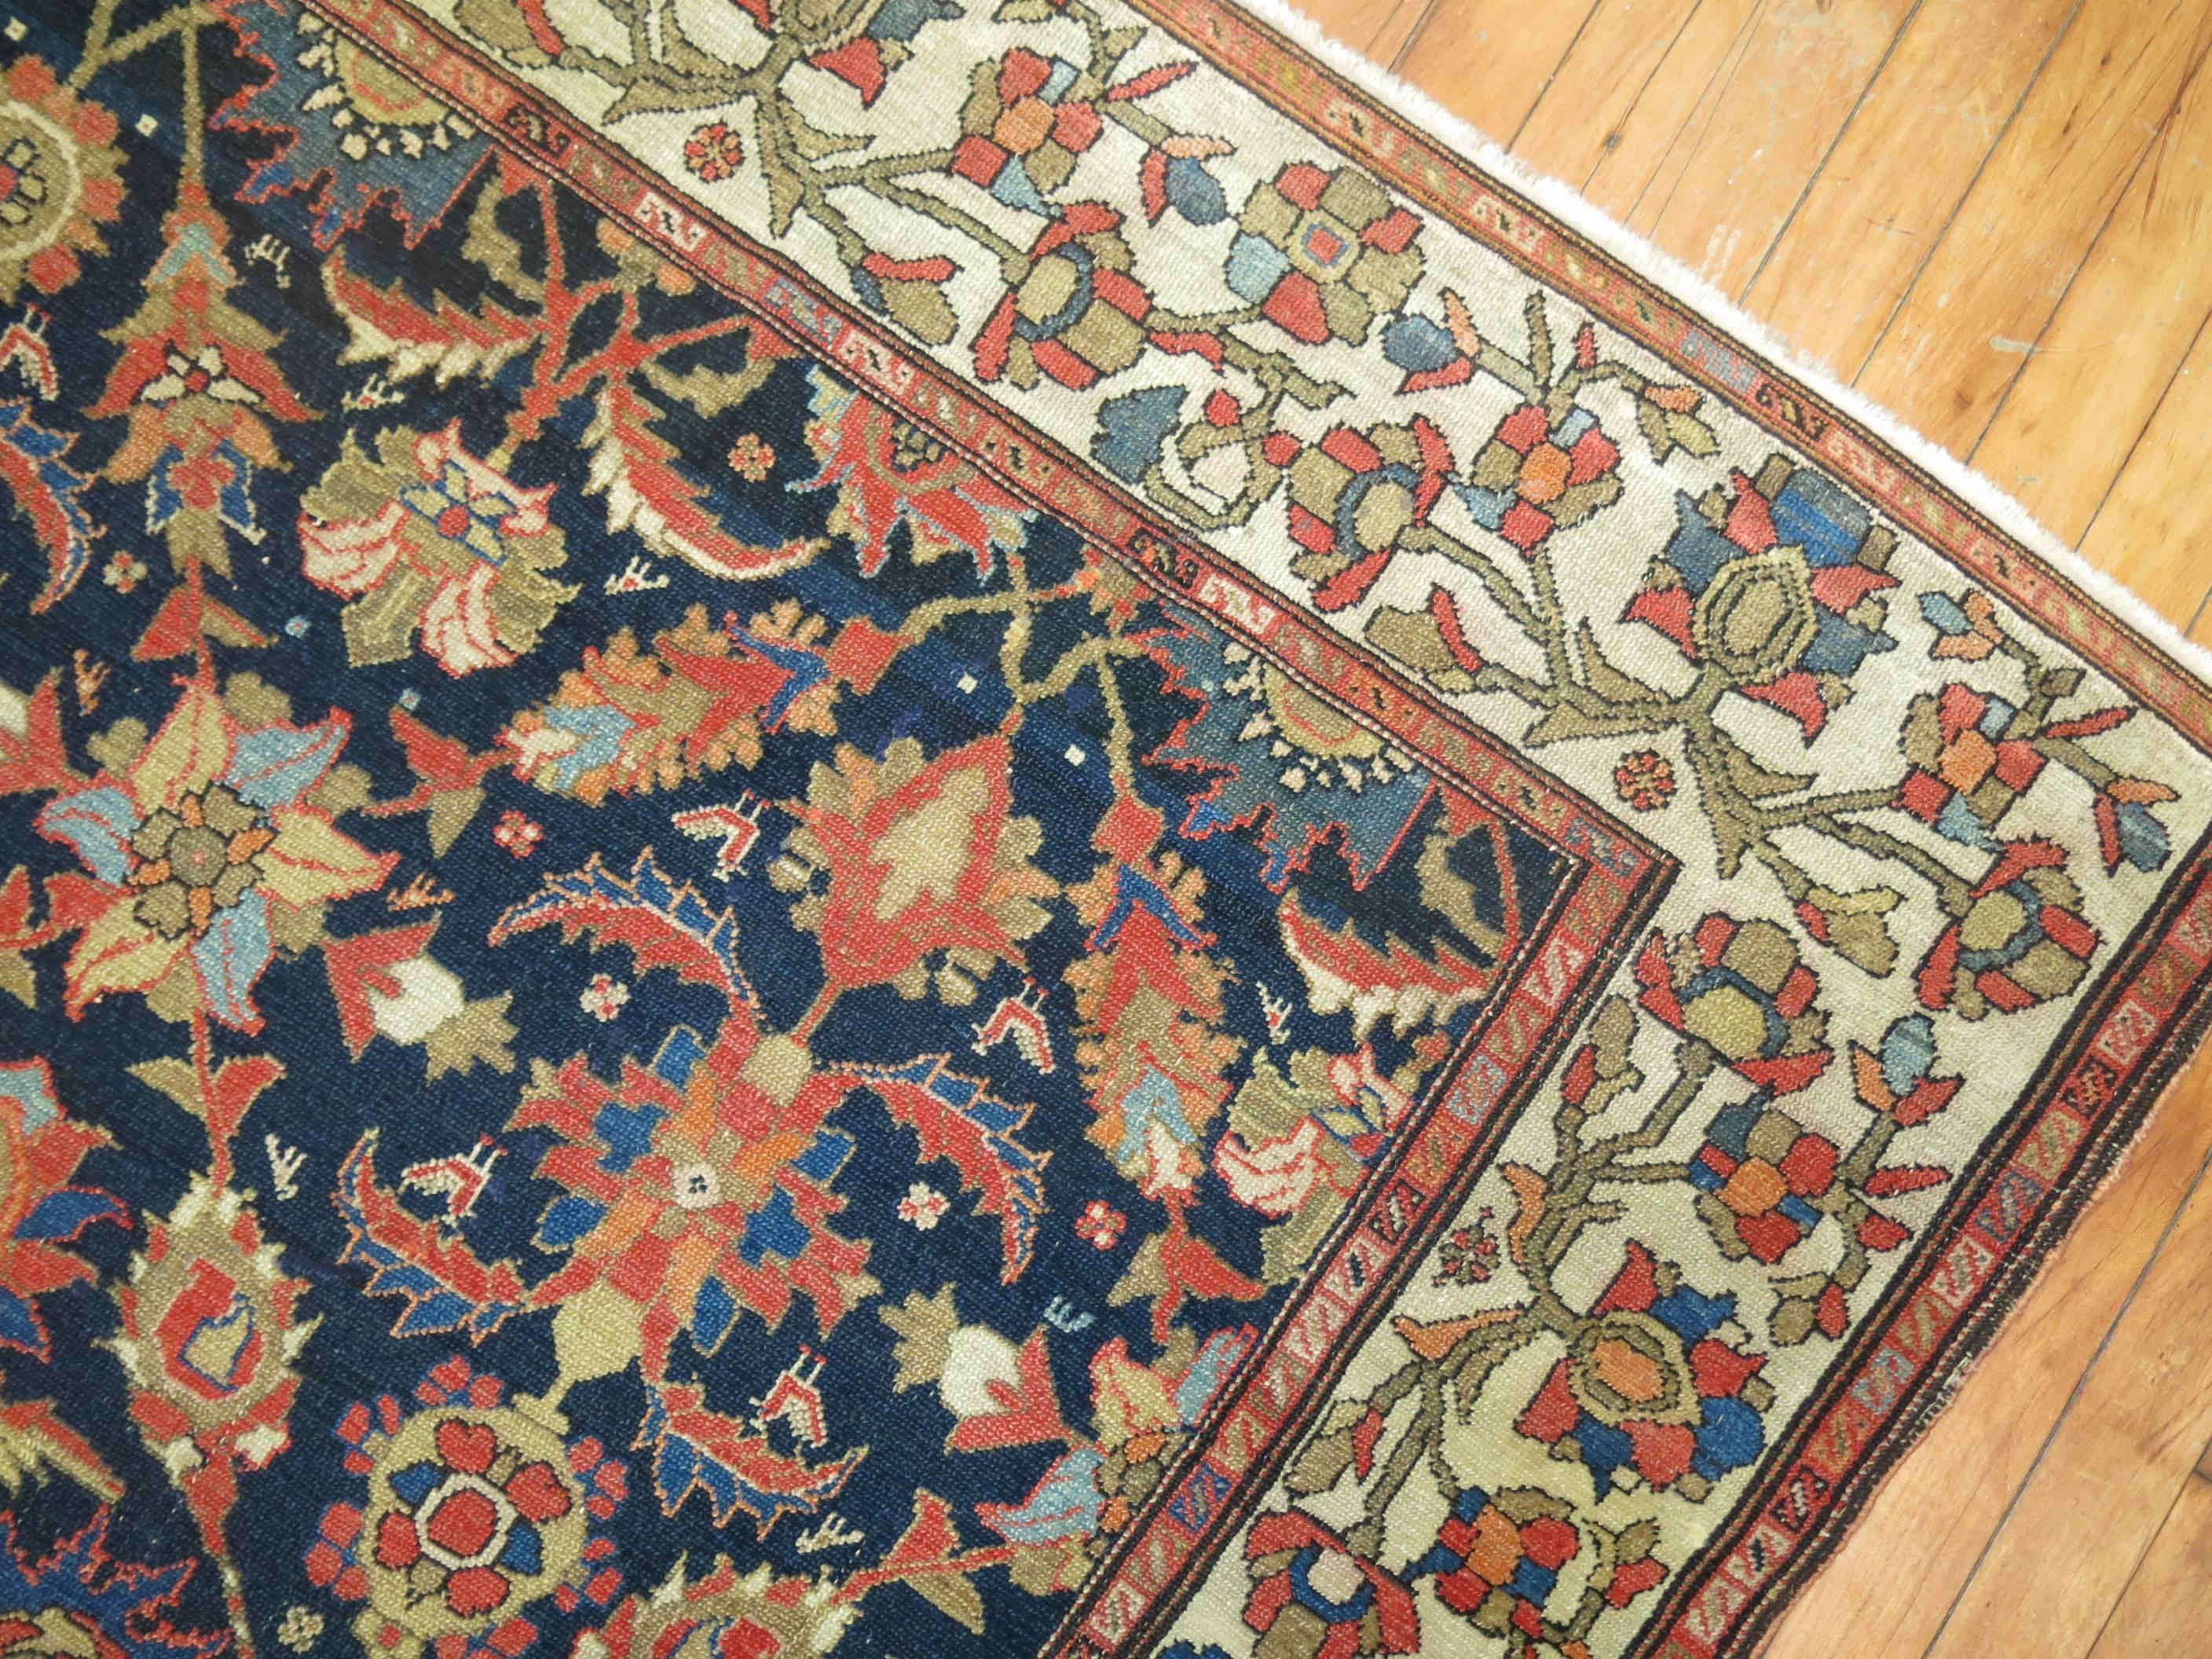 Finely woven authentic Early 20th century Persian rug with navy background and rustic tones. 